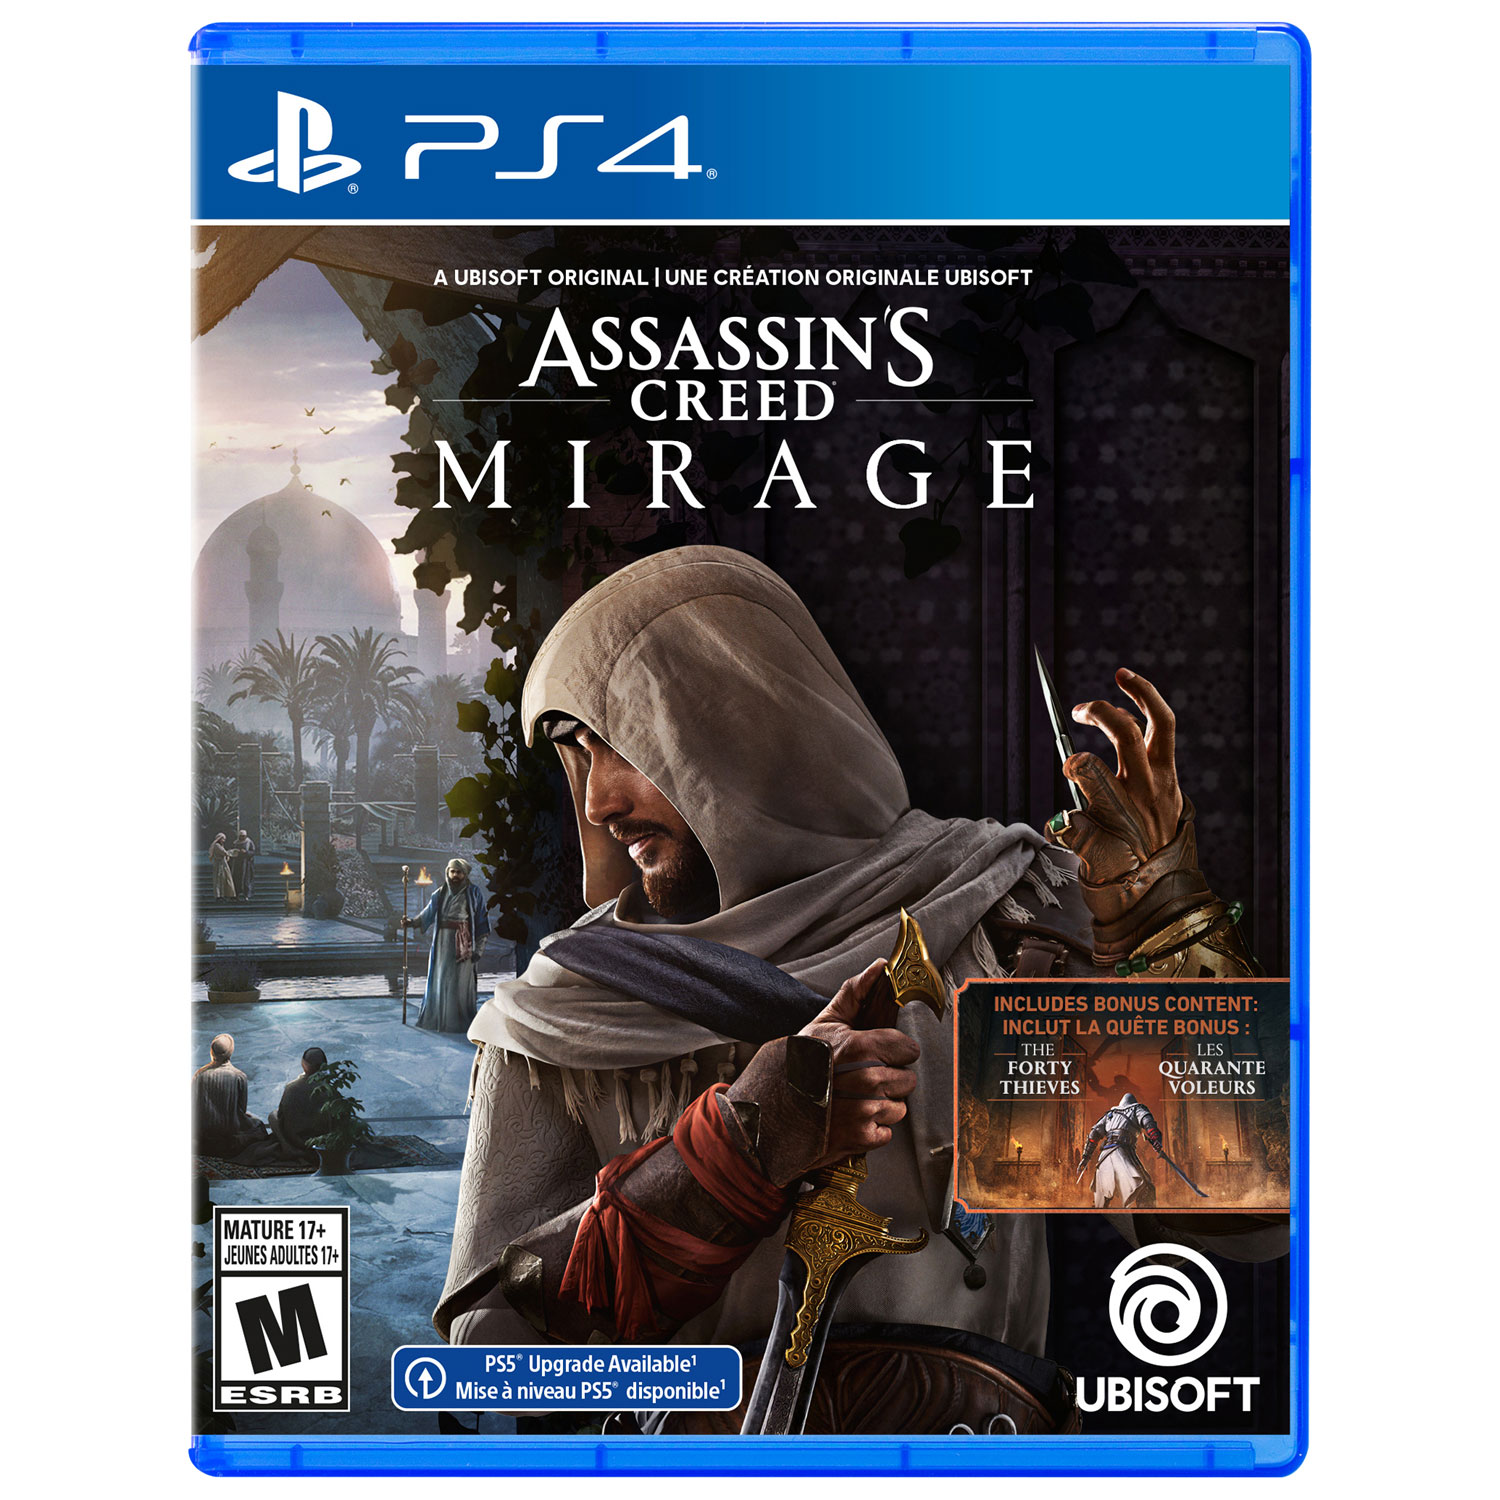 PS4 Assassin's Creed Mirage